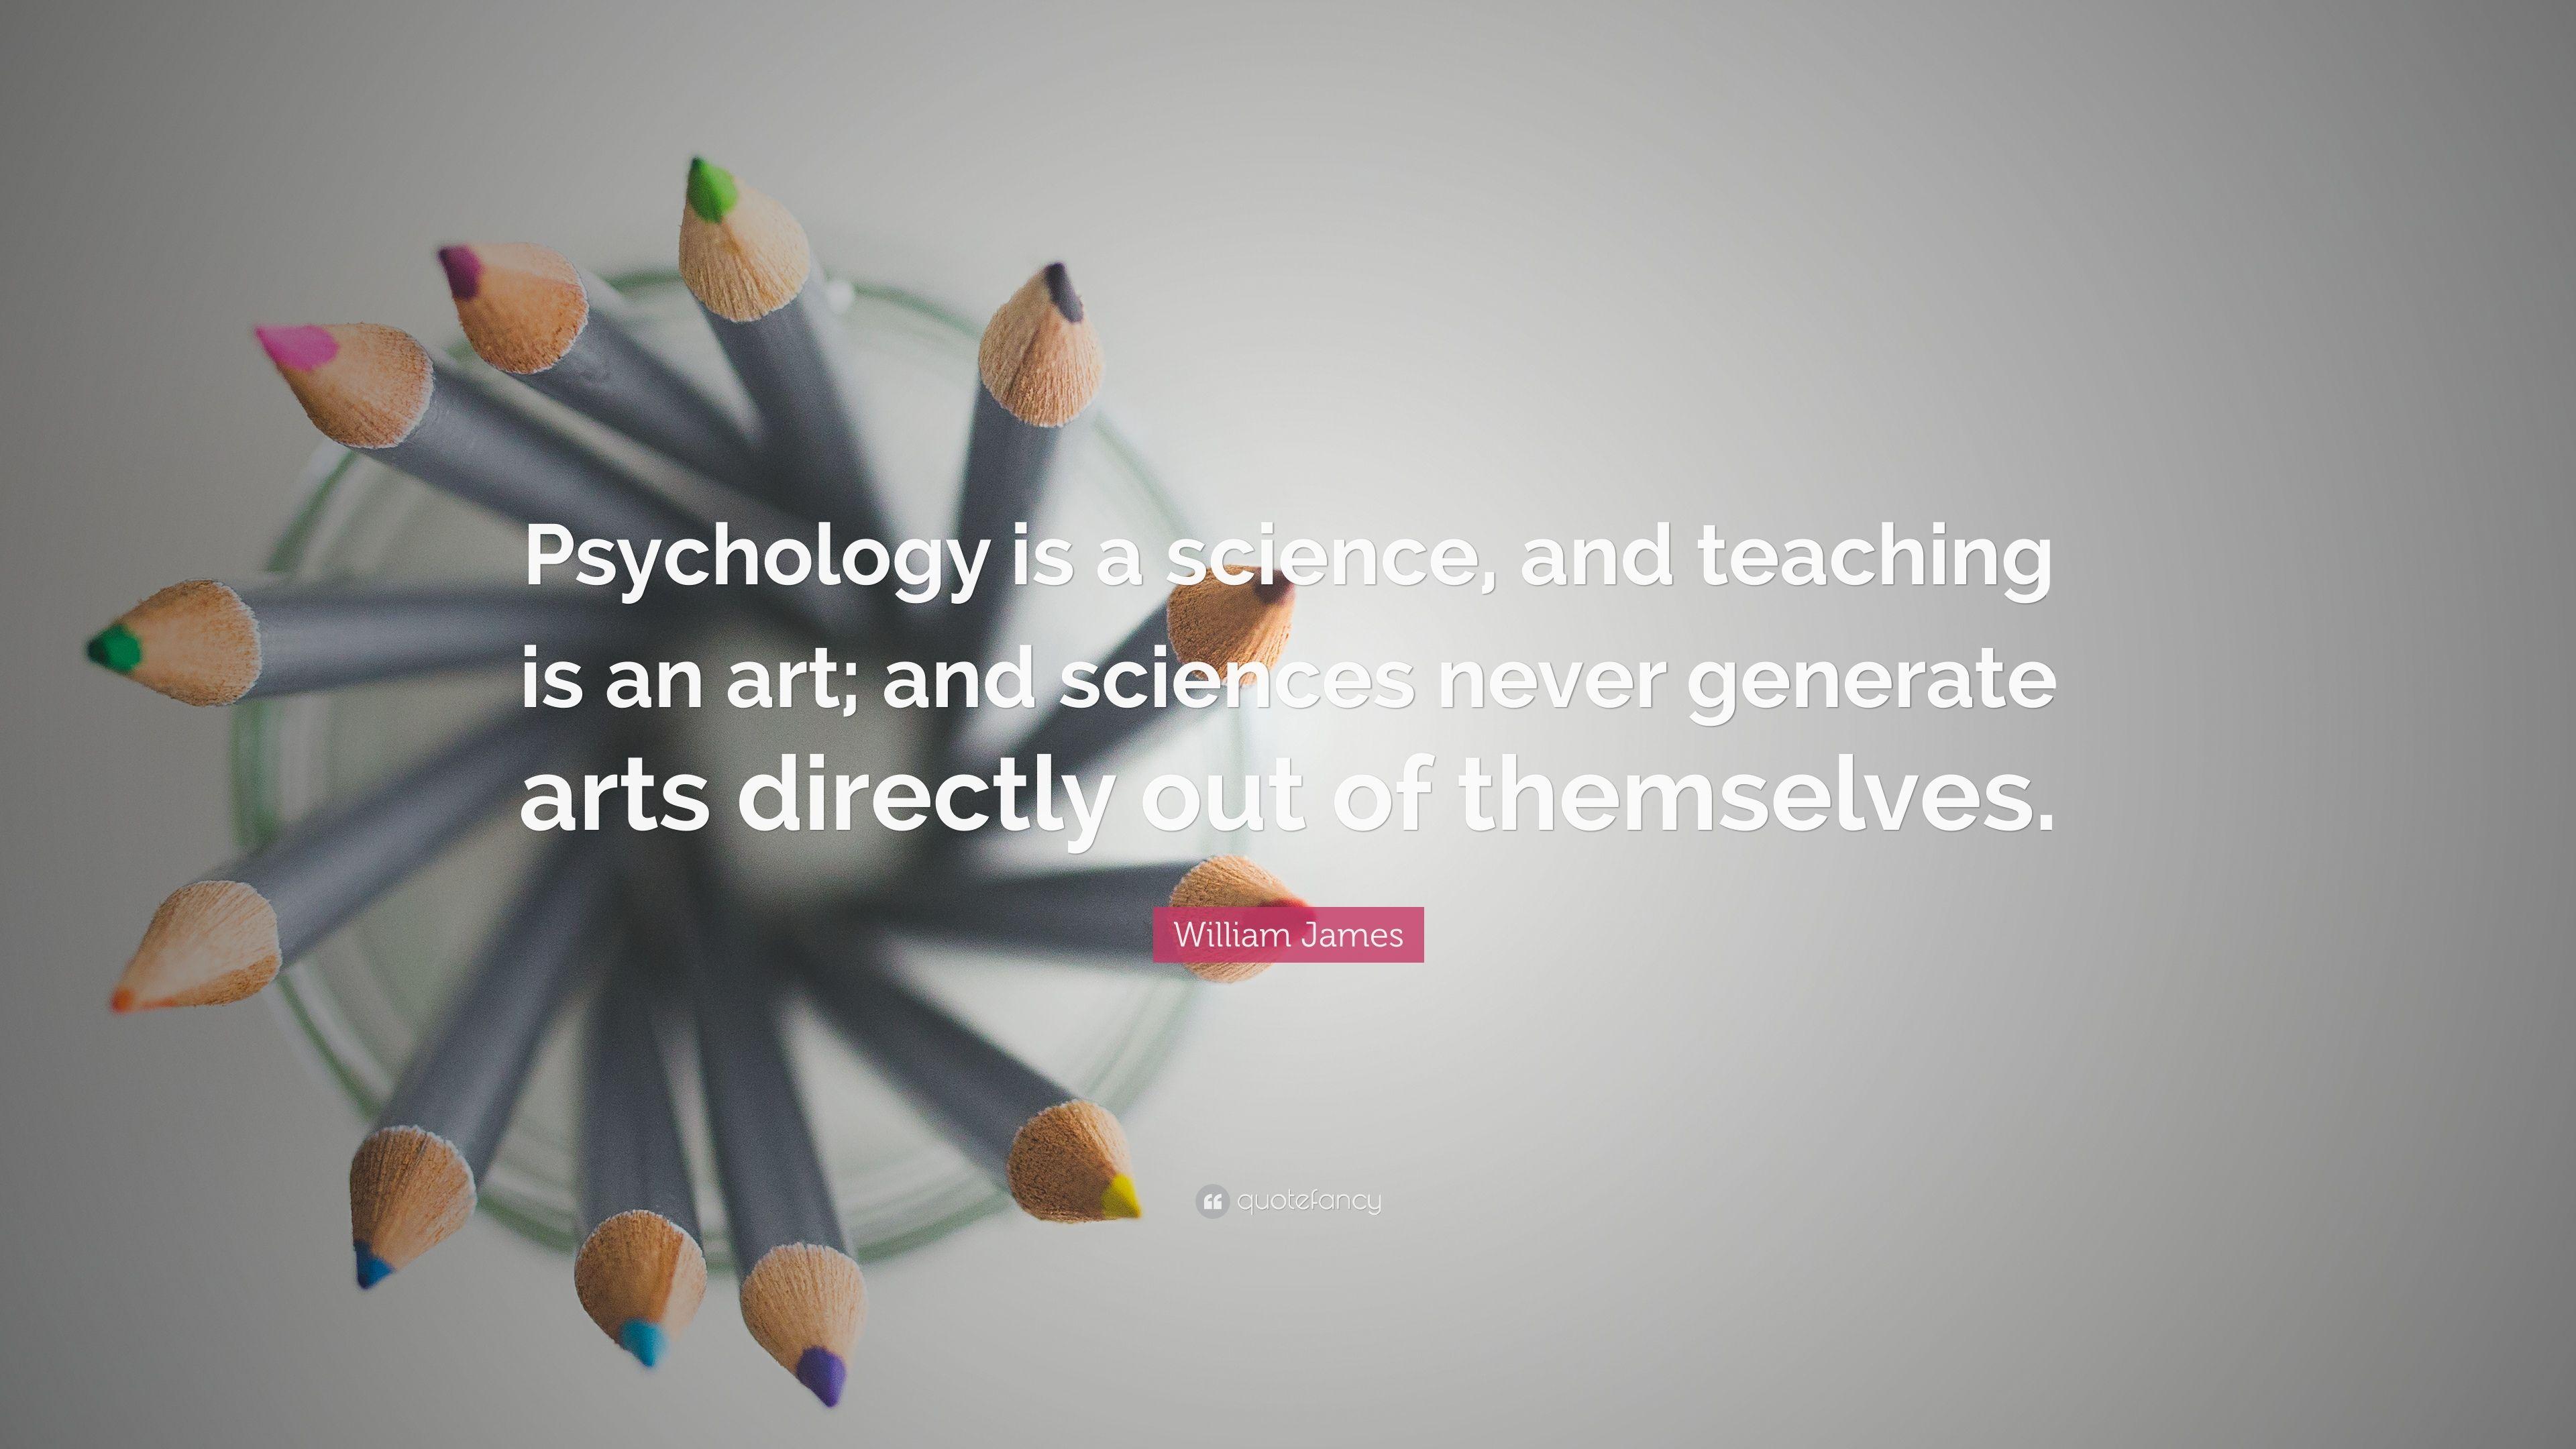 William James Quote: “Psychology is a science, and teaching is an